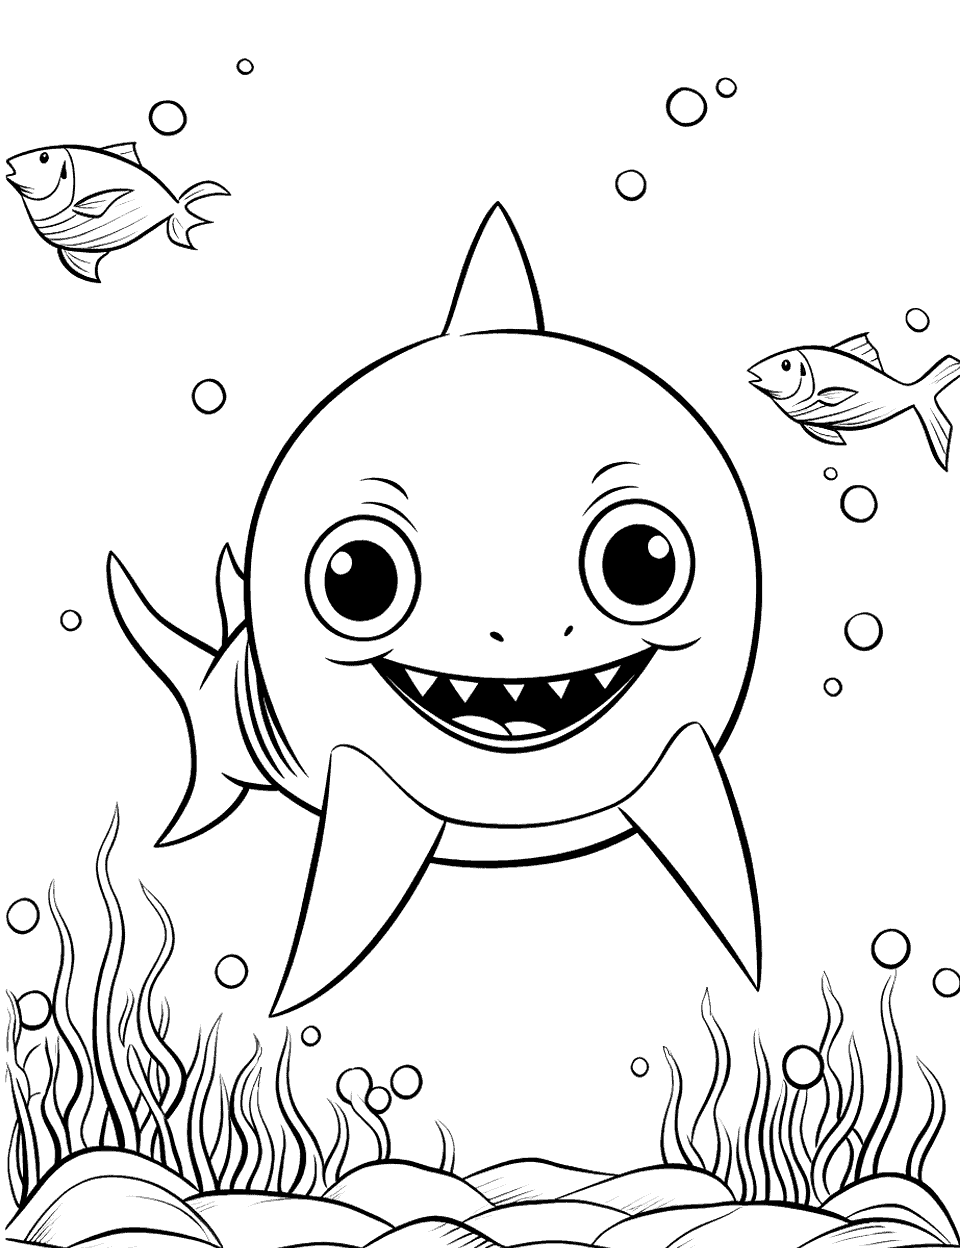 Baby Shark and the Fishy Coloring Page - Baby Shark playing hide and seek with small fish.